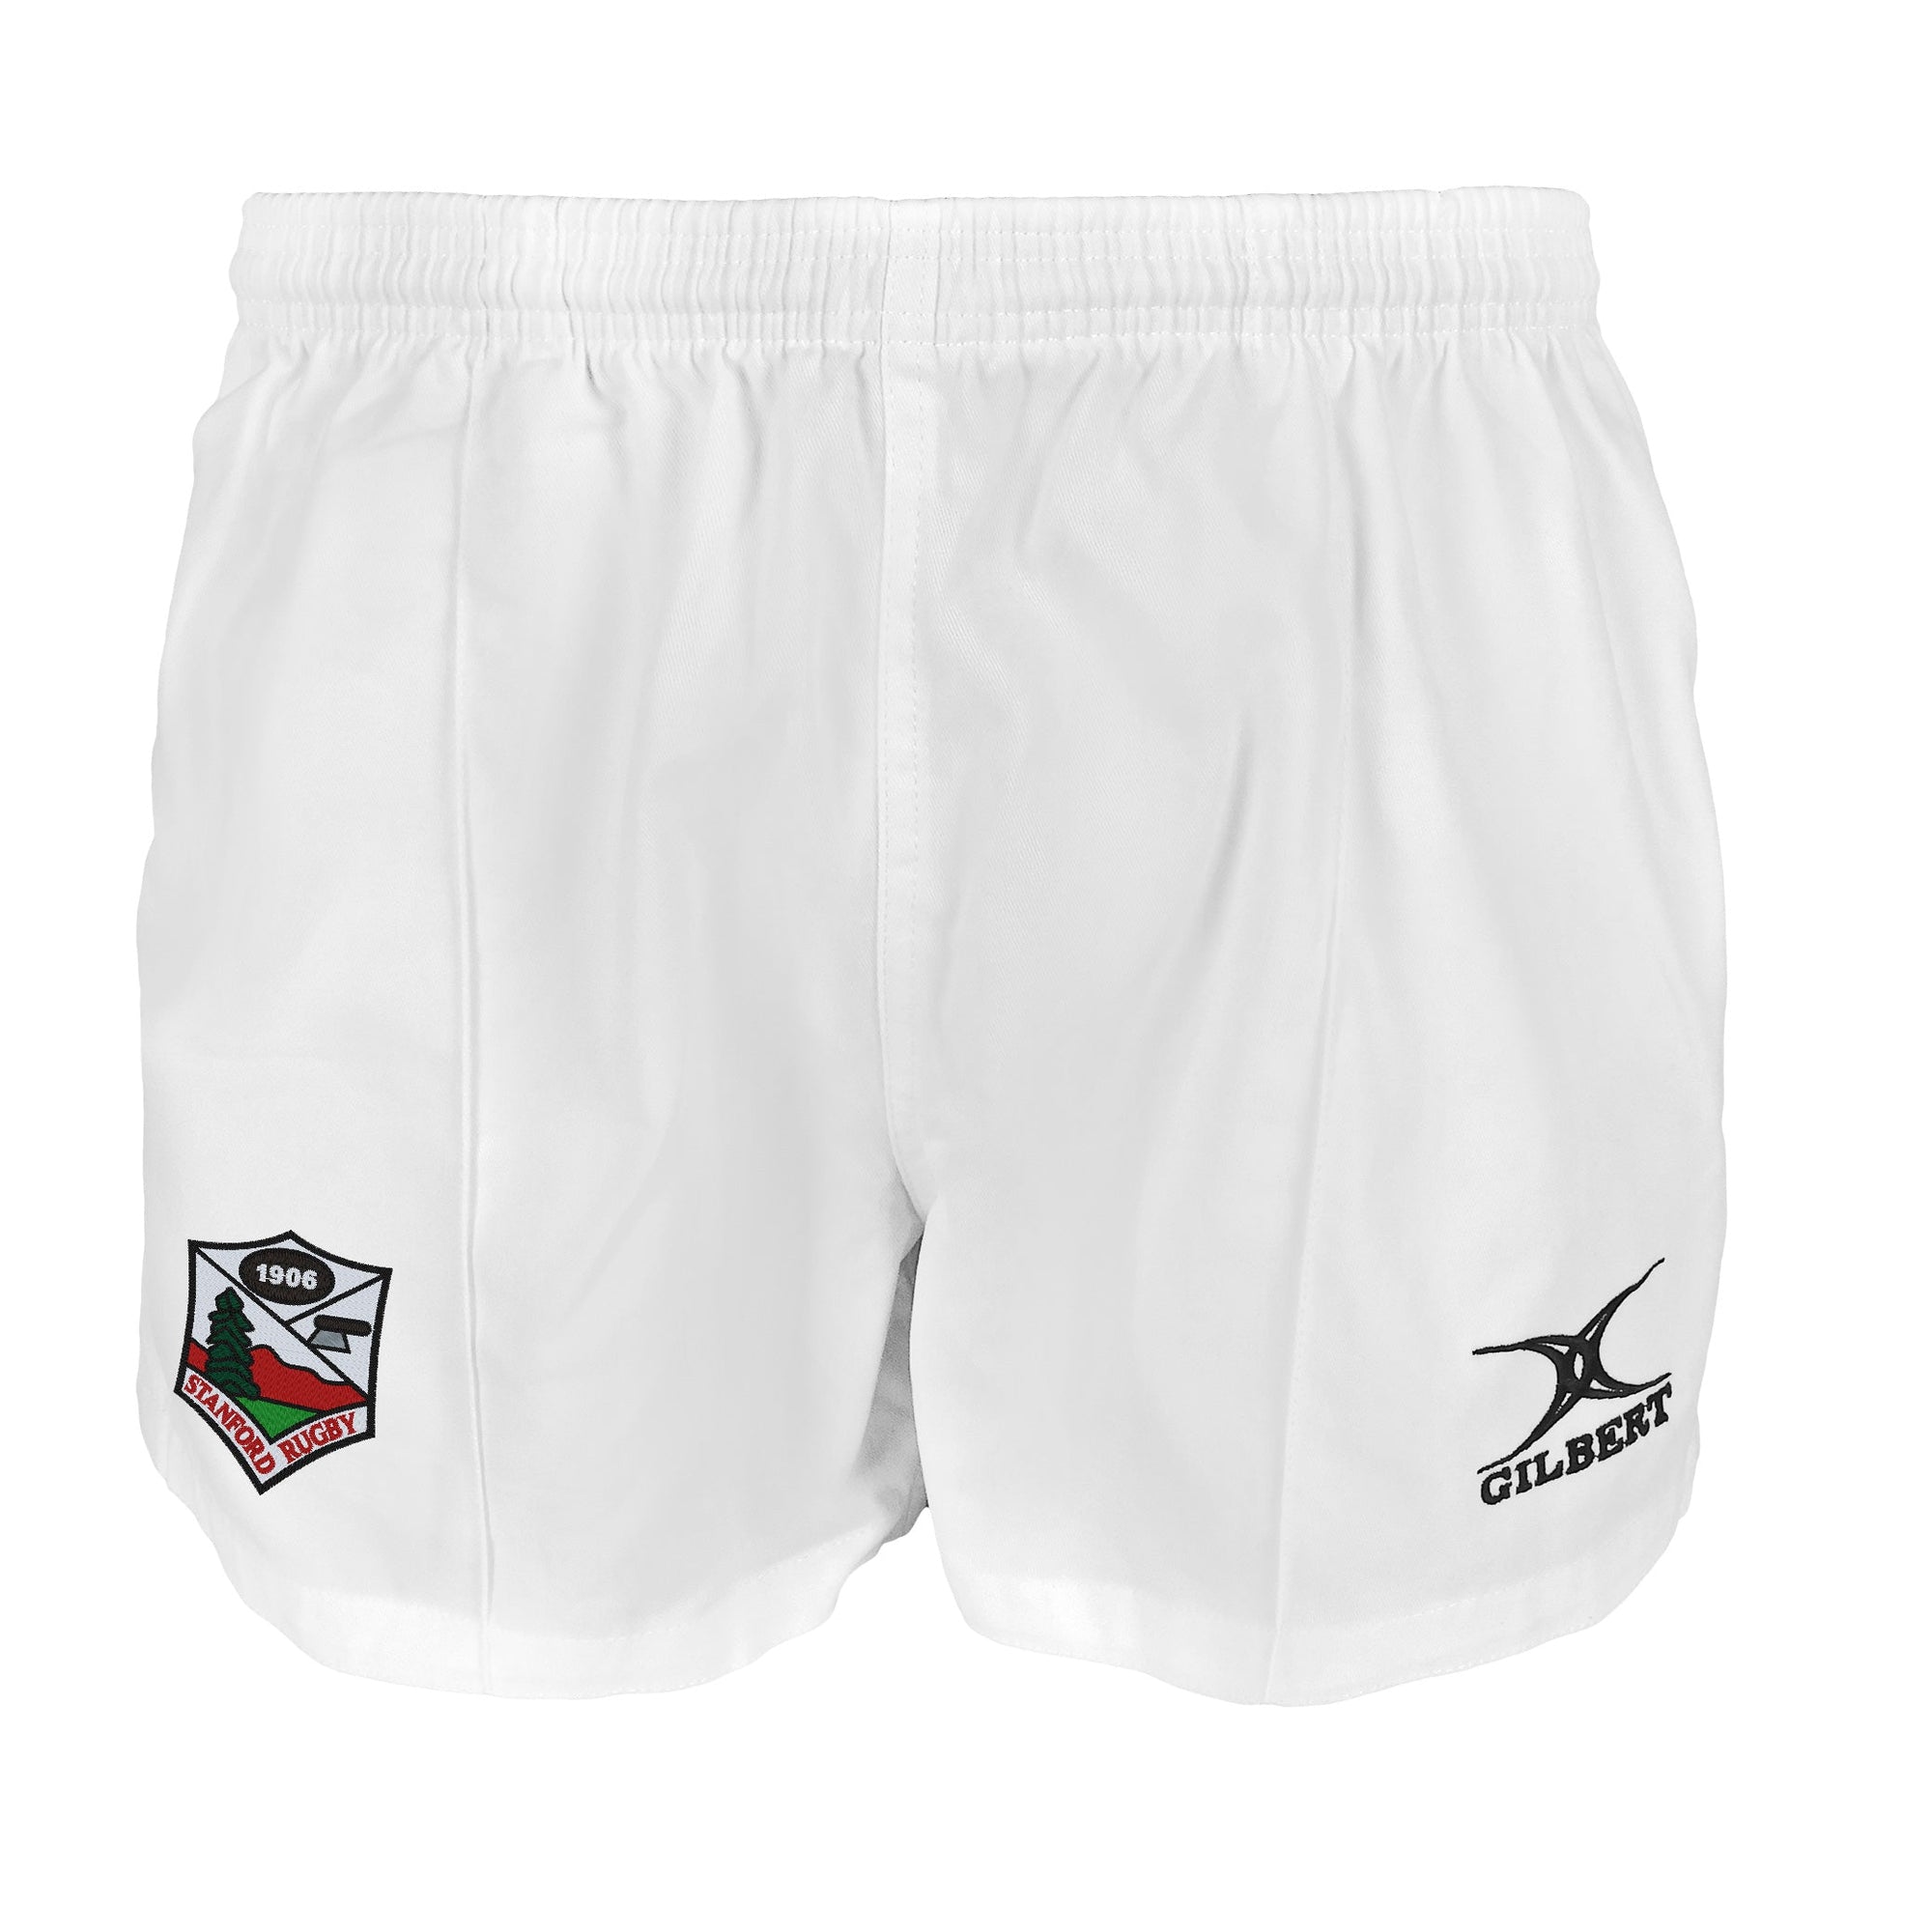 Rugby Imports Stanford Rugby Kiwi Pro Rugby Shorts